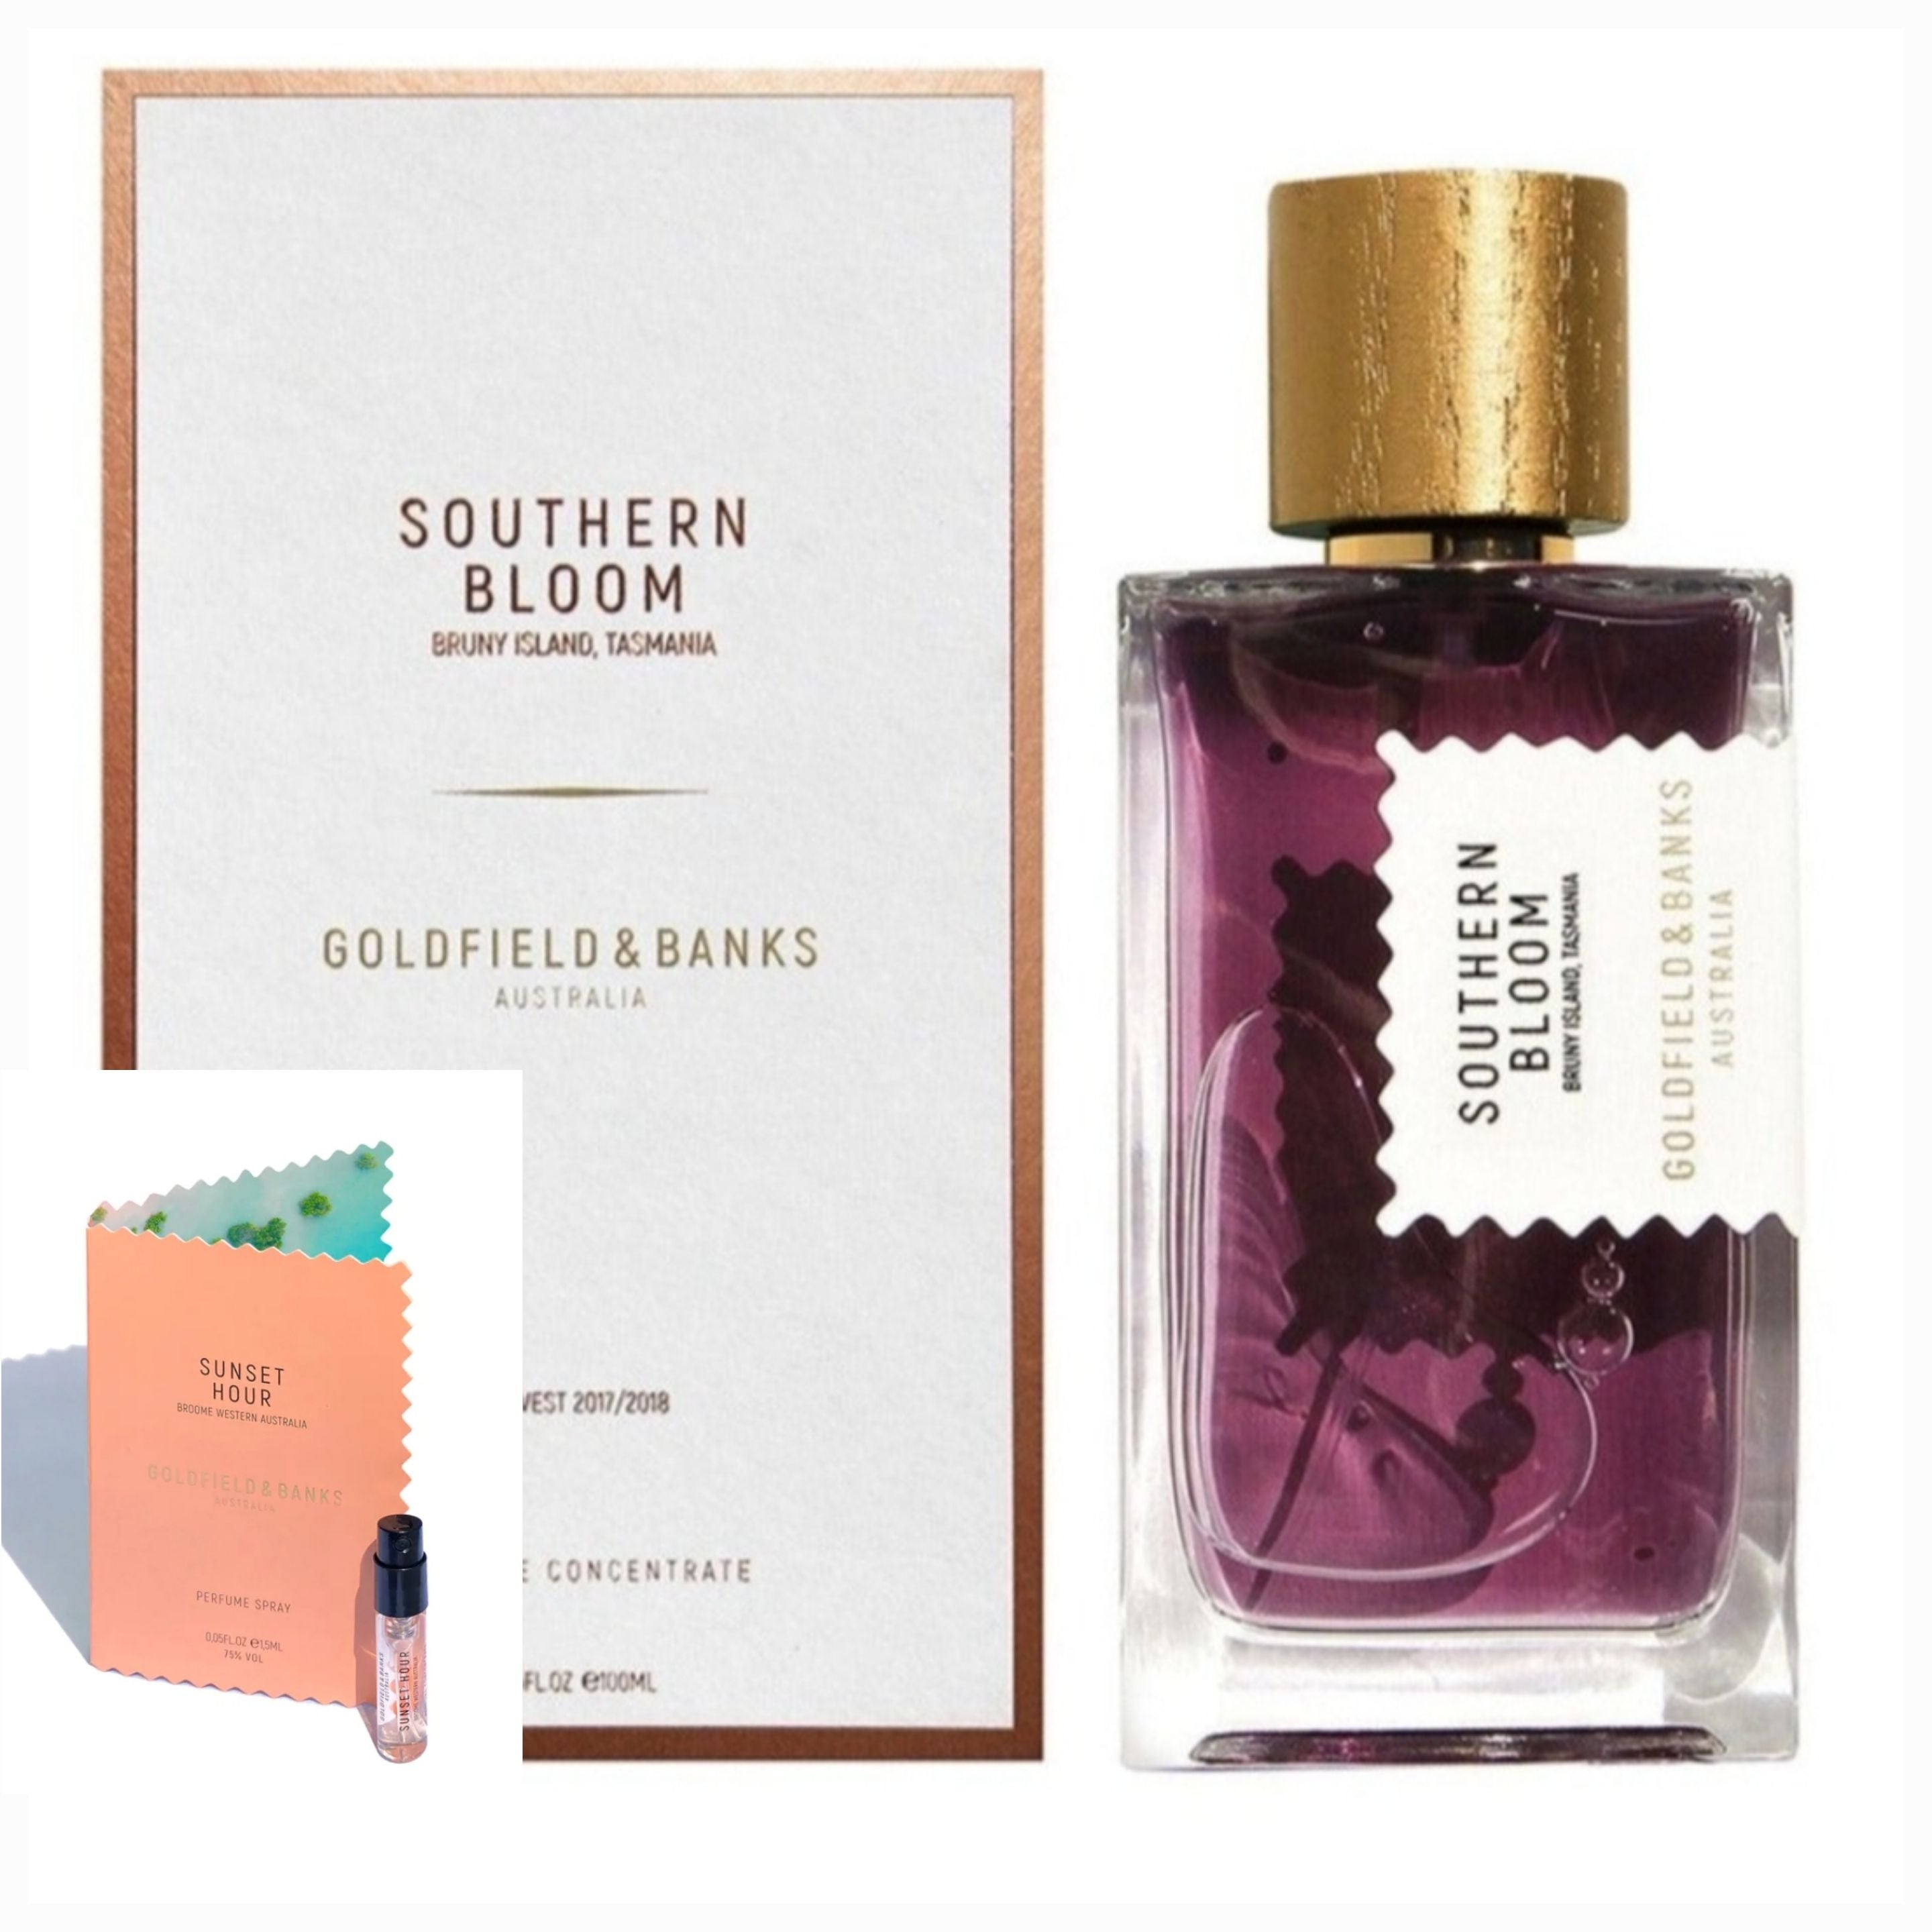 GOLDFIELD & BANKS Southern Bloom 100ml* + Free Gift